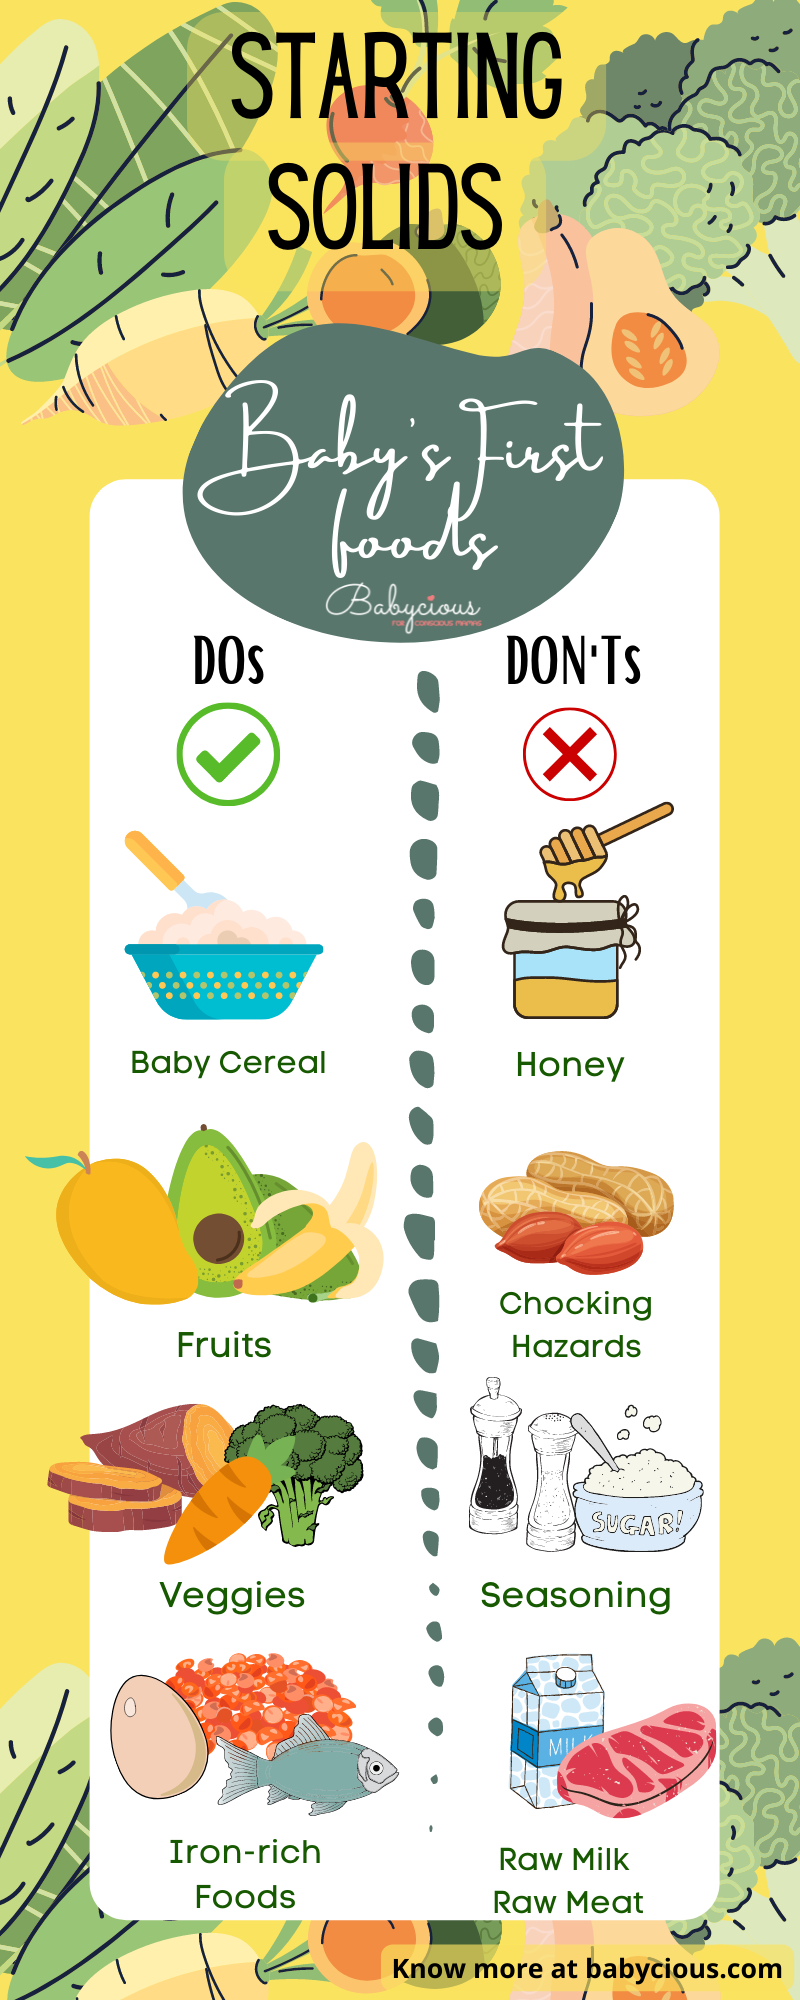 Introducing solids baby first foods chart